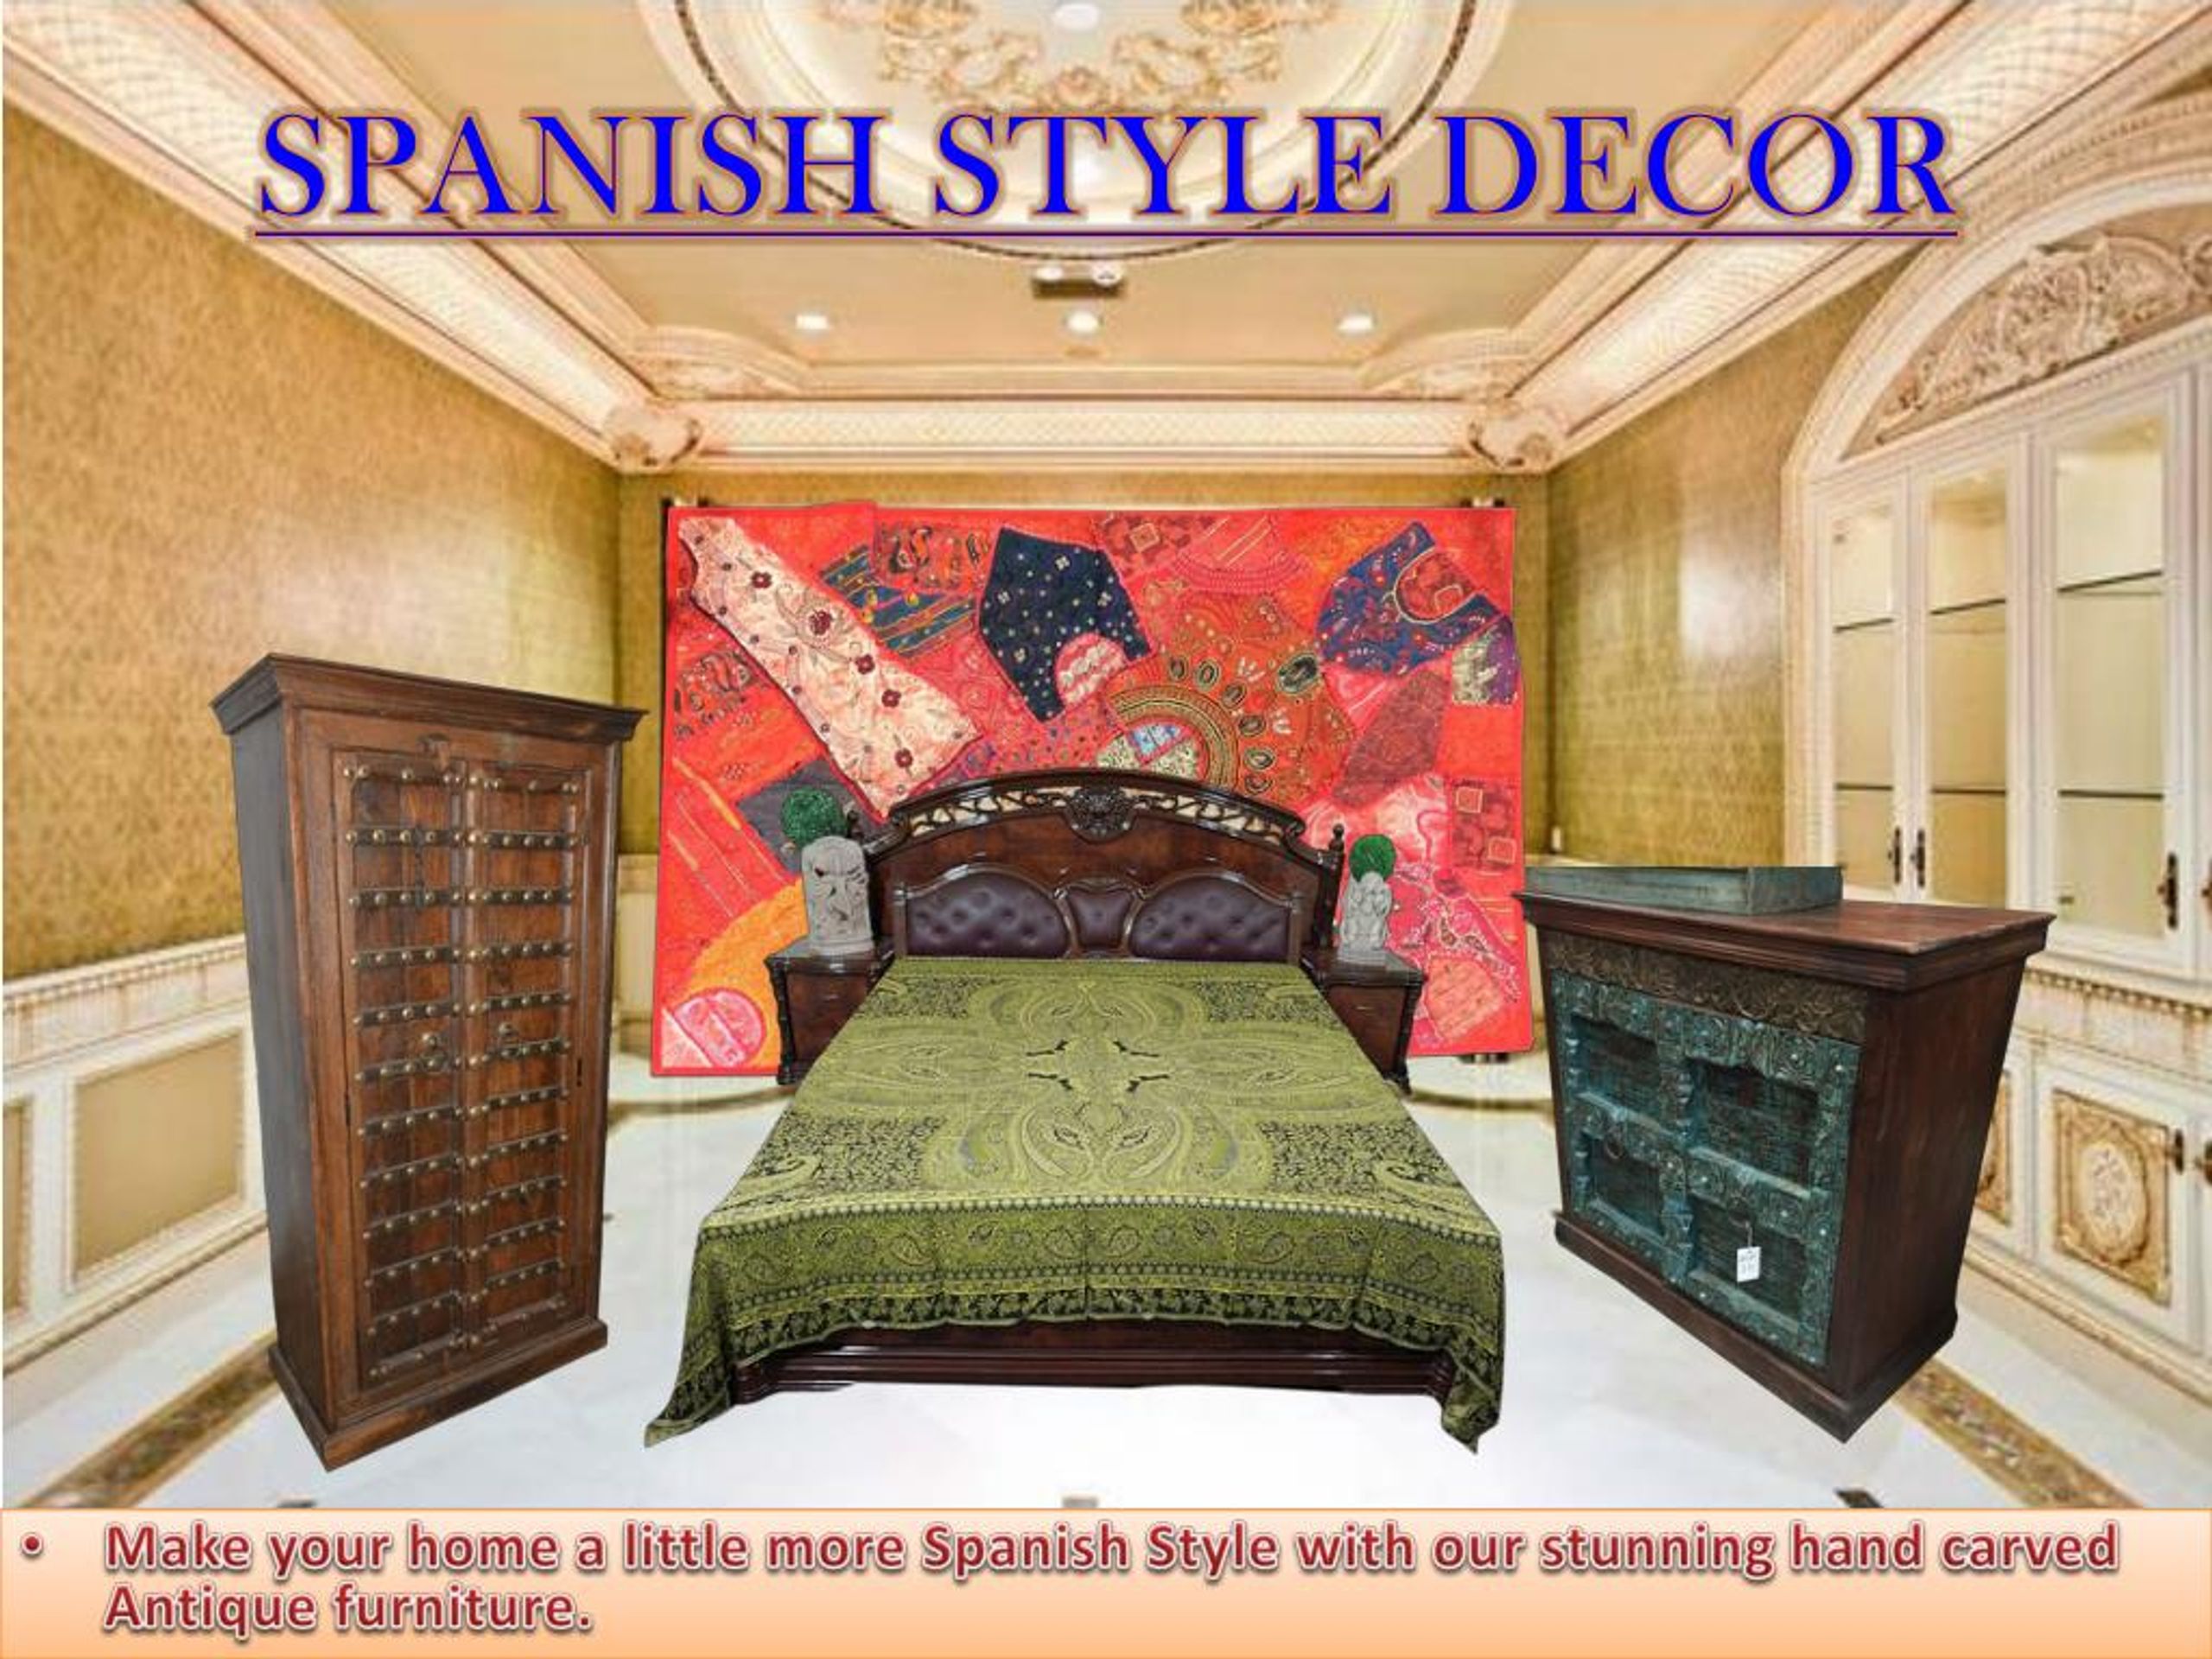 Ppt Spanish Style Decor Powerpoint Presentation Free Download Id 7385328